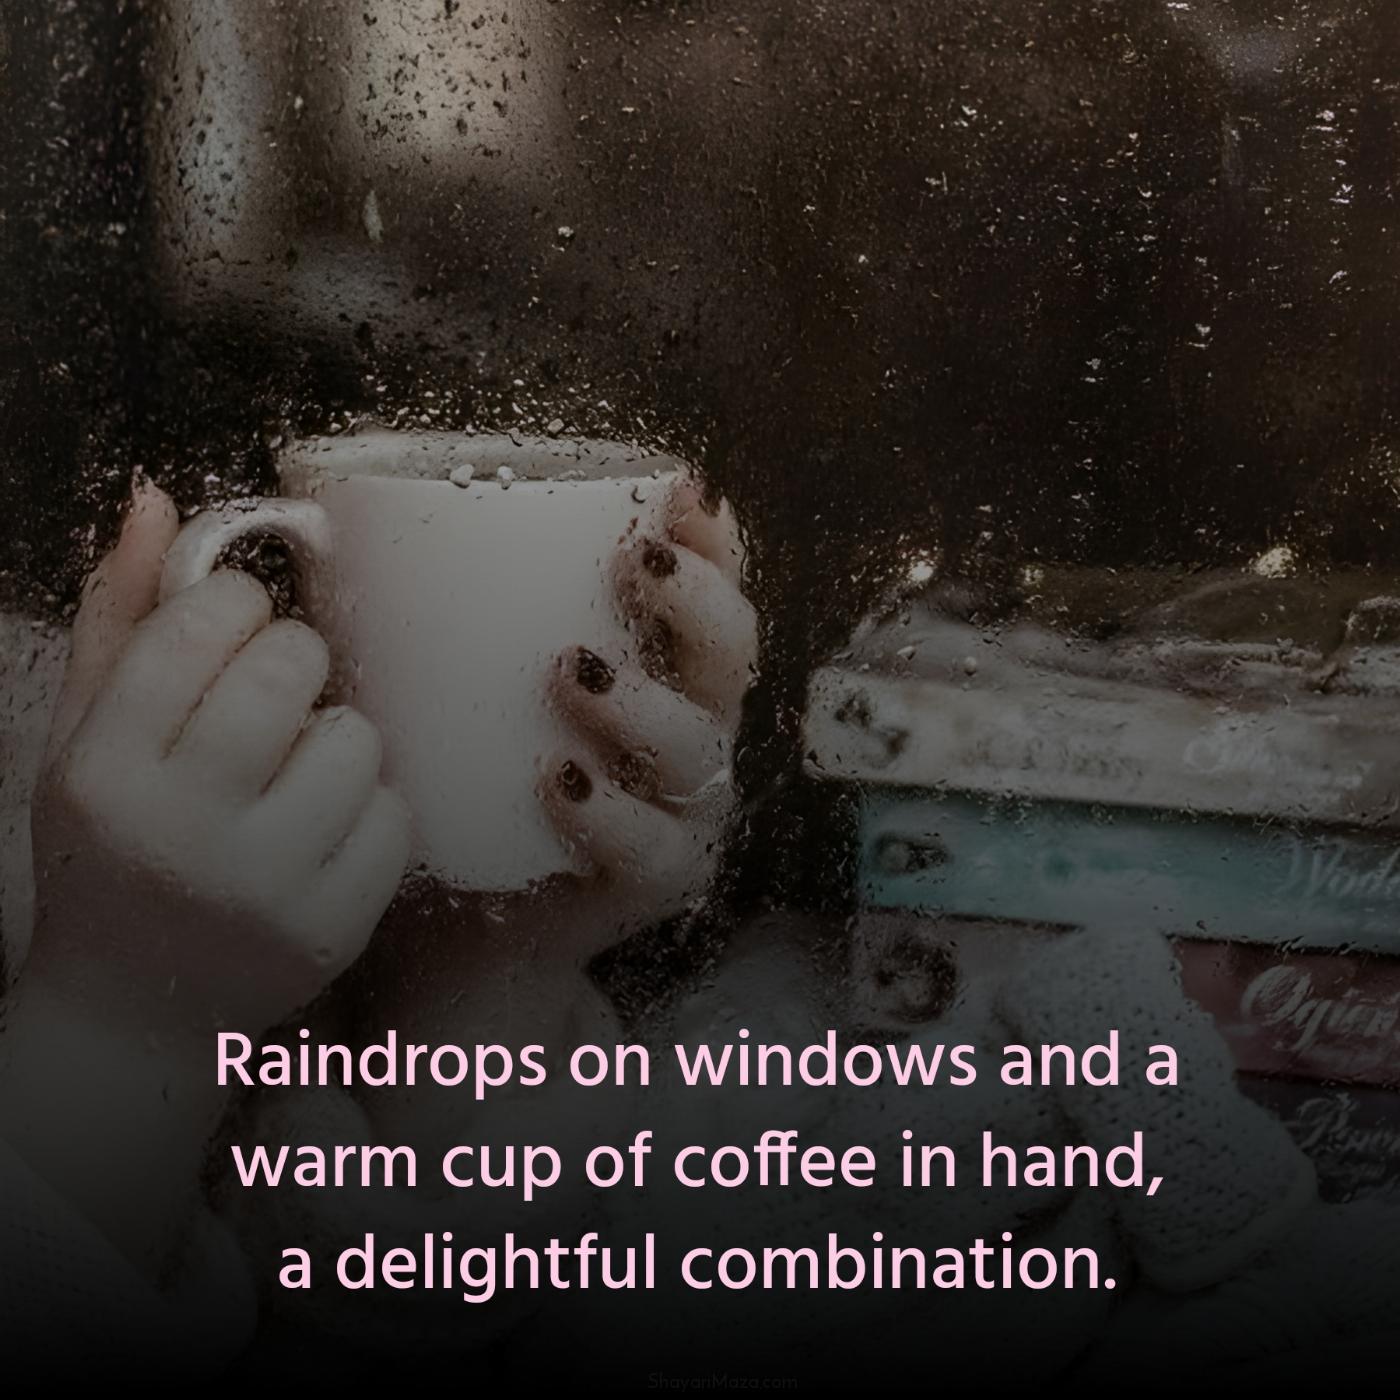 Raindrops on windows and a warm cup of coffee in hand